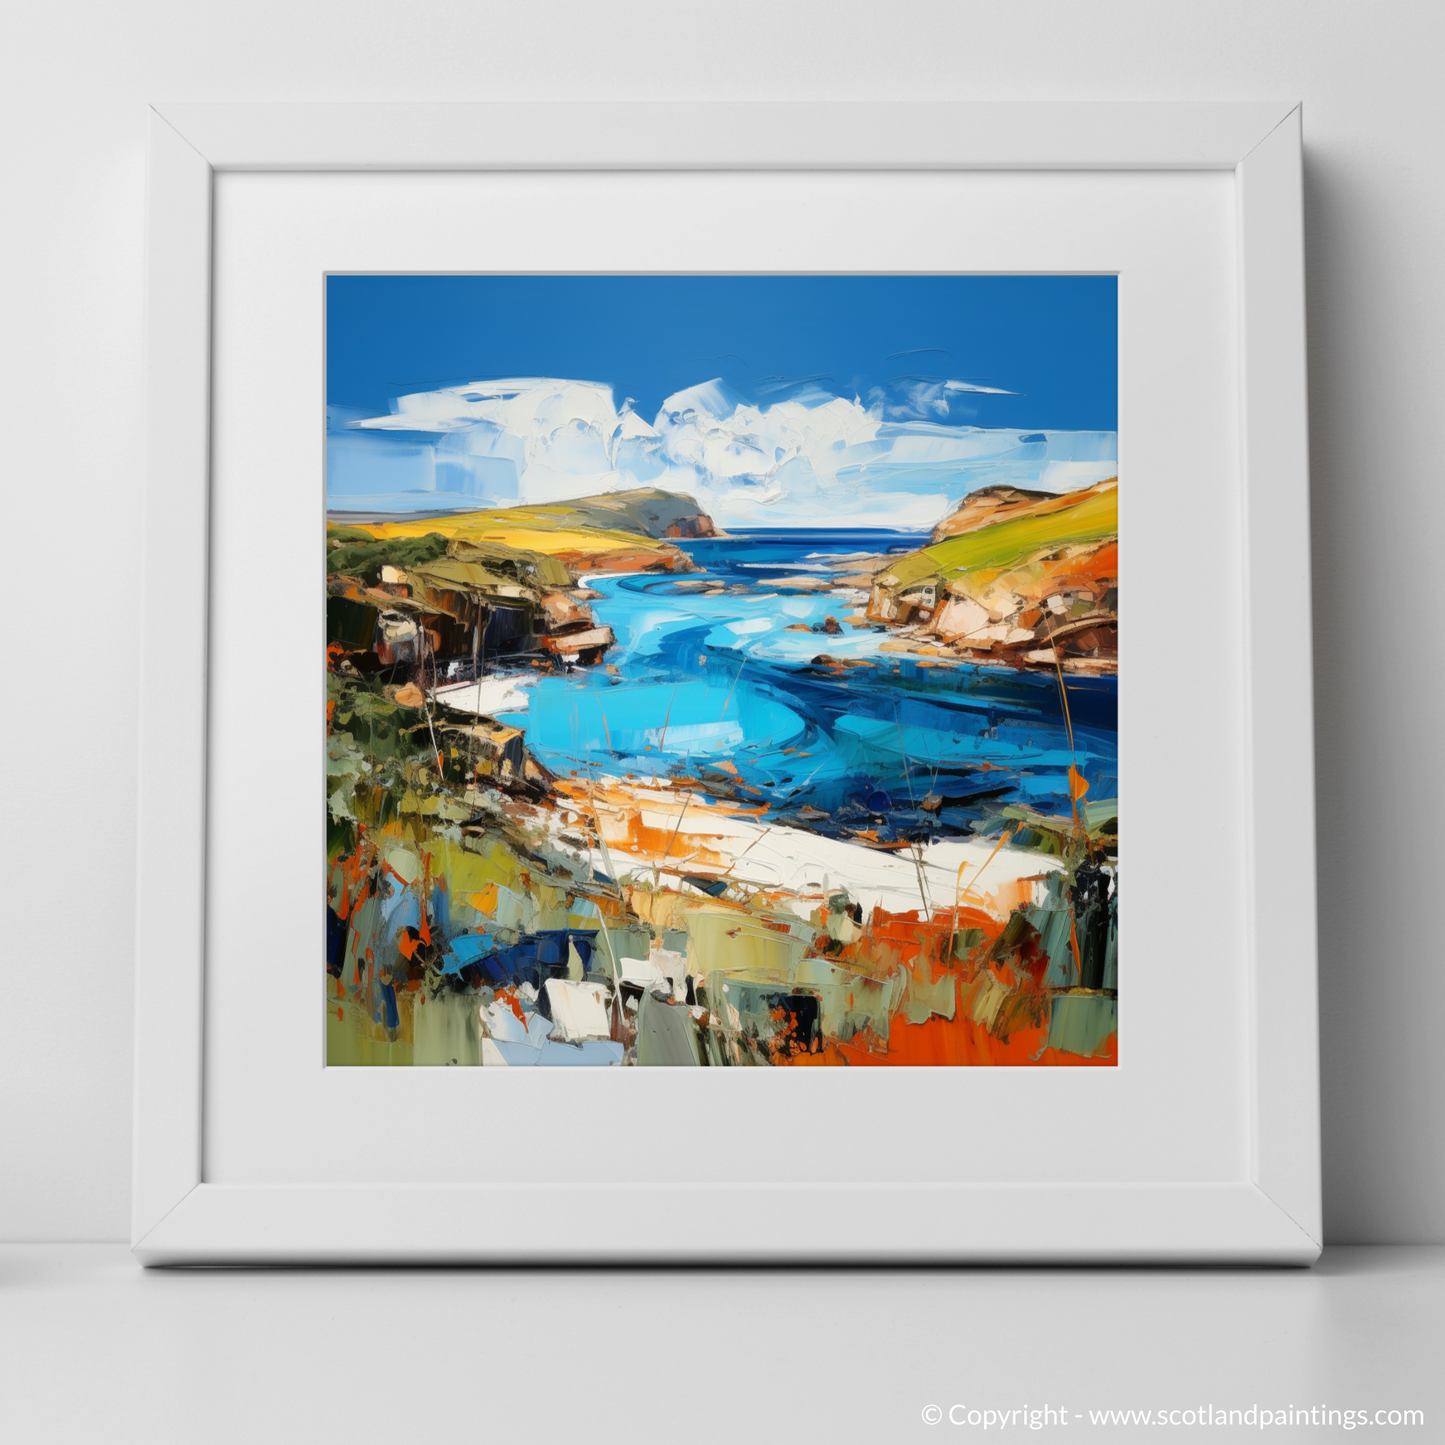 Art Print of Scourie Bay, Sutherland with a white frame